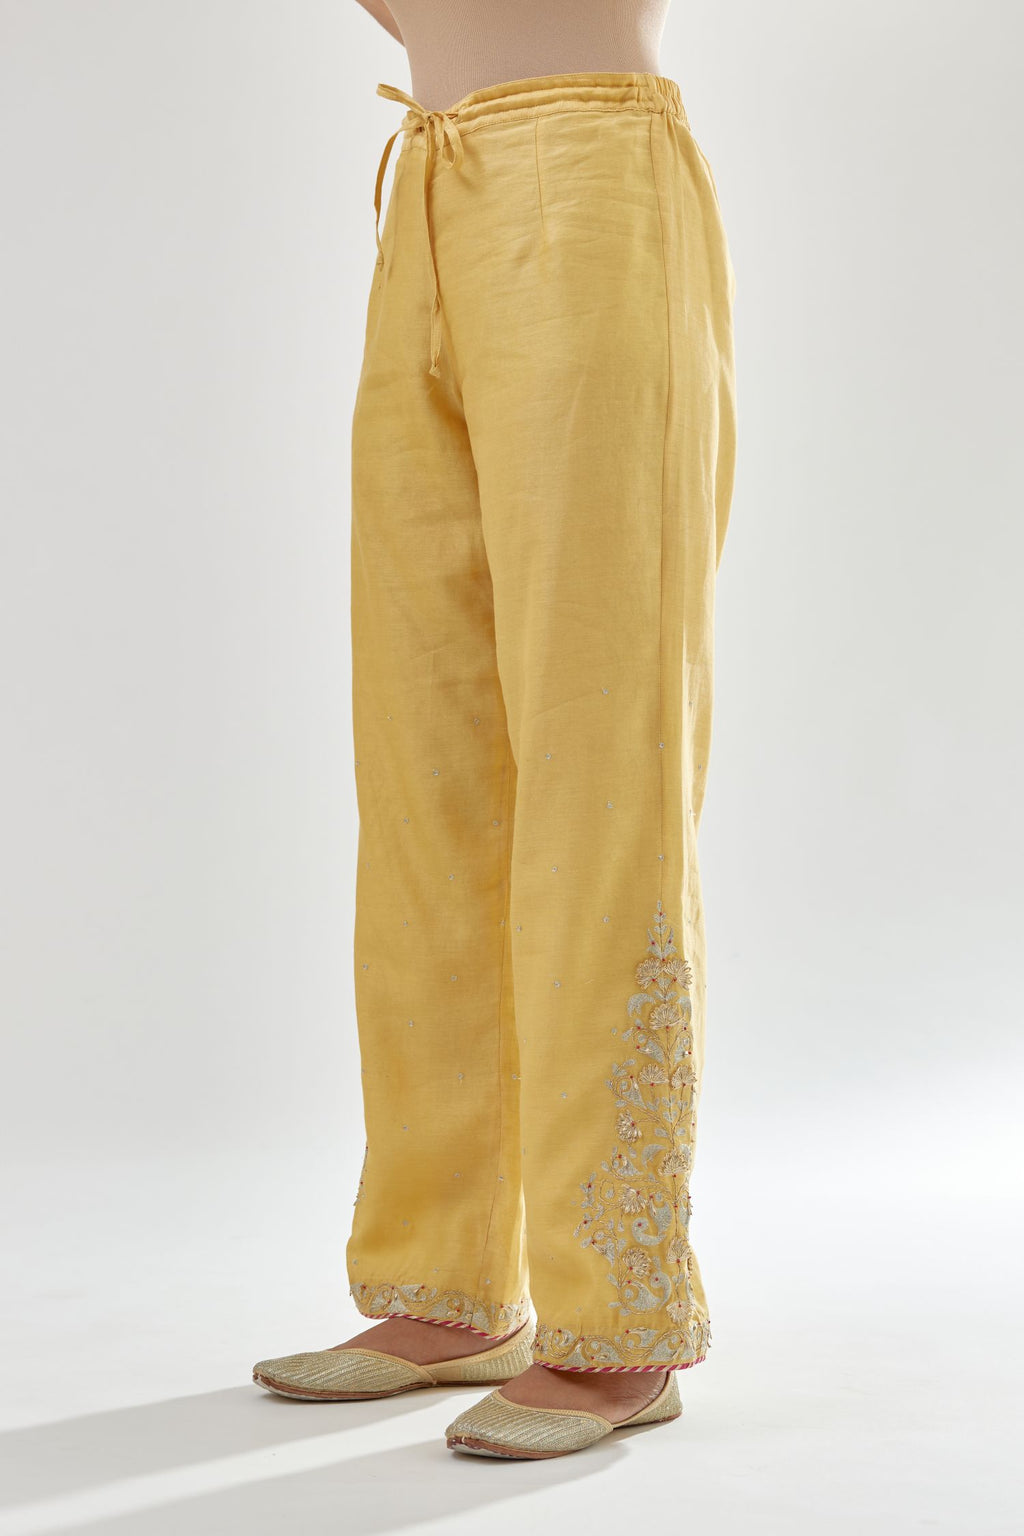 Yellow silk chanderi straight pants, hem is detailed with zari, dori and gota embroidered boota at sides.